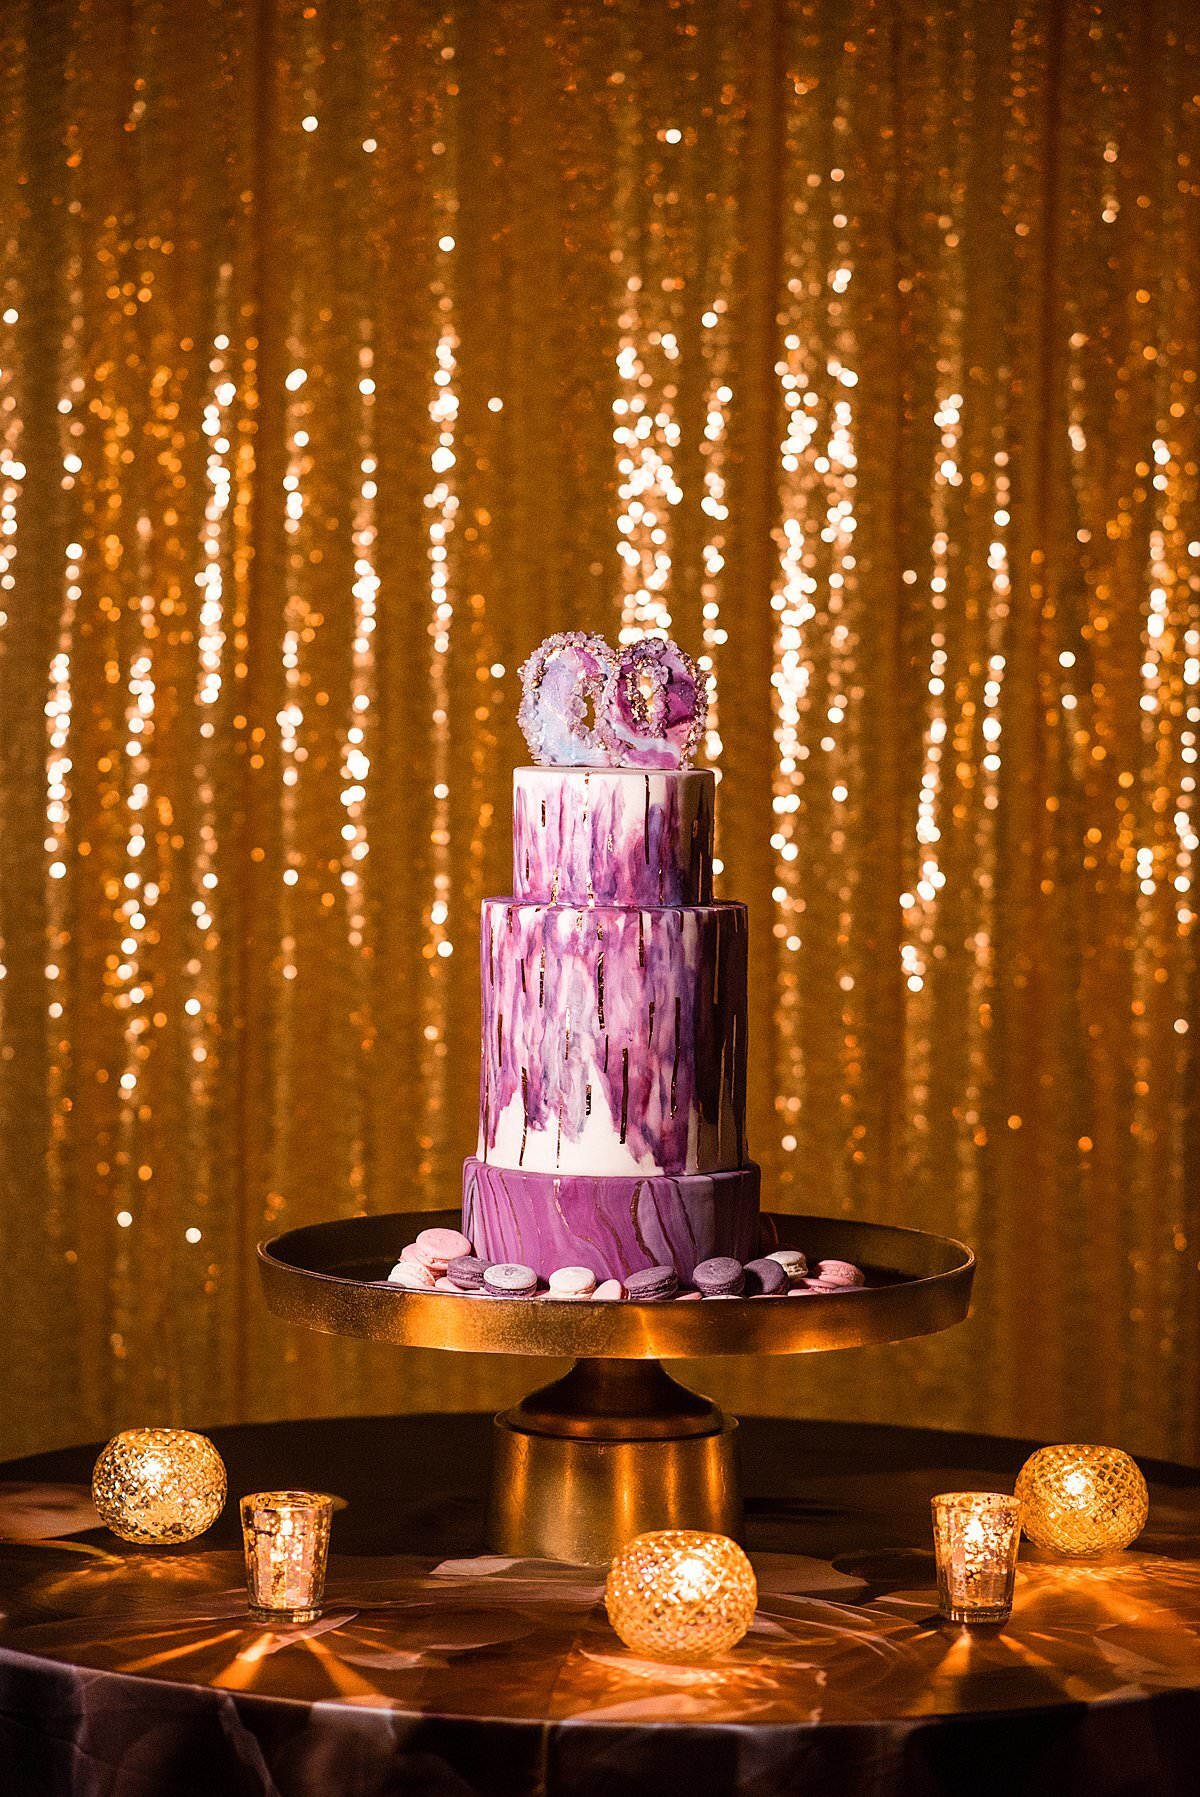 purple art decor wedding cake with geode topper surrounded by pink and purple macrons with a gold sequin drapery backdrop